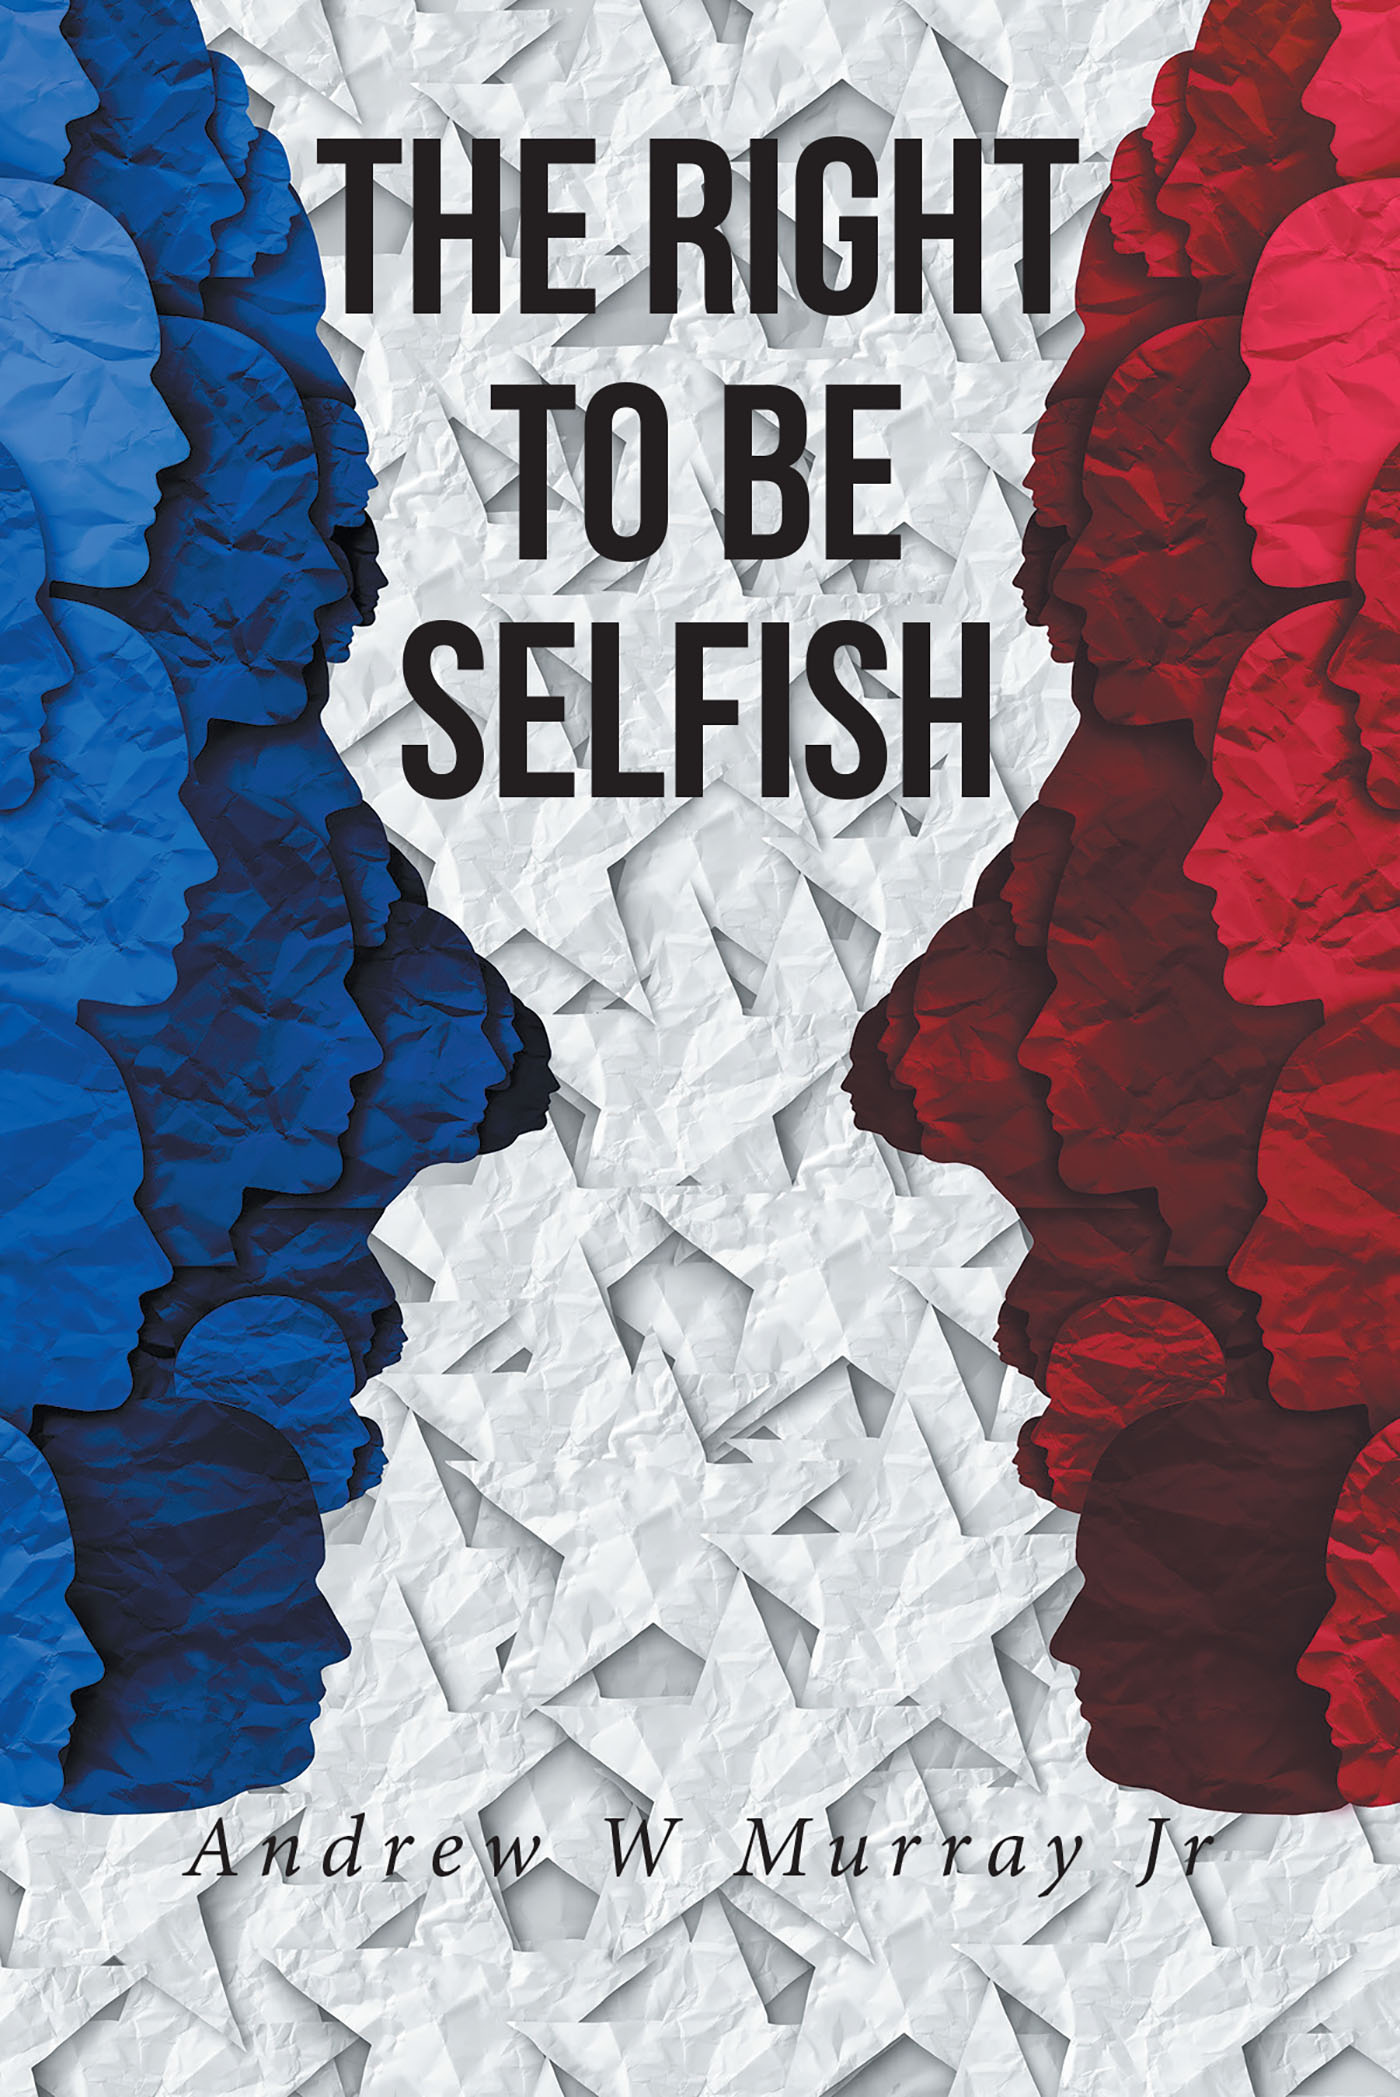 Andrew W Murray Jr.’s New Book, "The Right to be Selfish," is a Fascinating Look at the Ways in Which One Must Work with Others for the Betterment of Society & the Nation